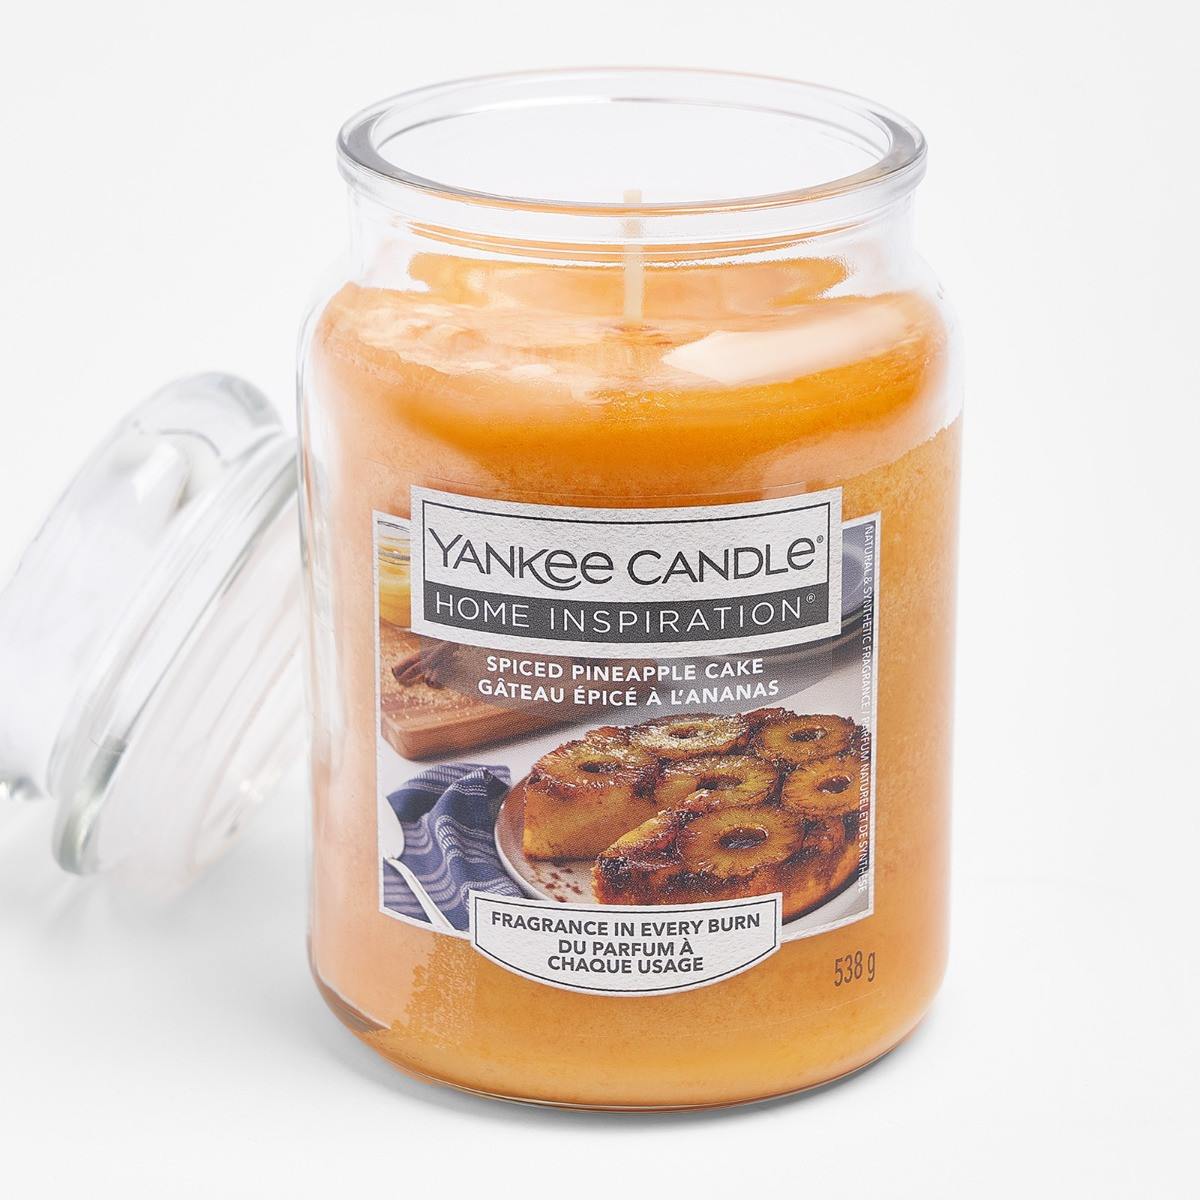 Yankee Candle Home Inspiration Large Jar - Spiced Pineapple Cake>